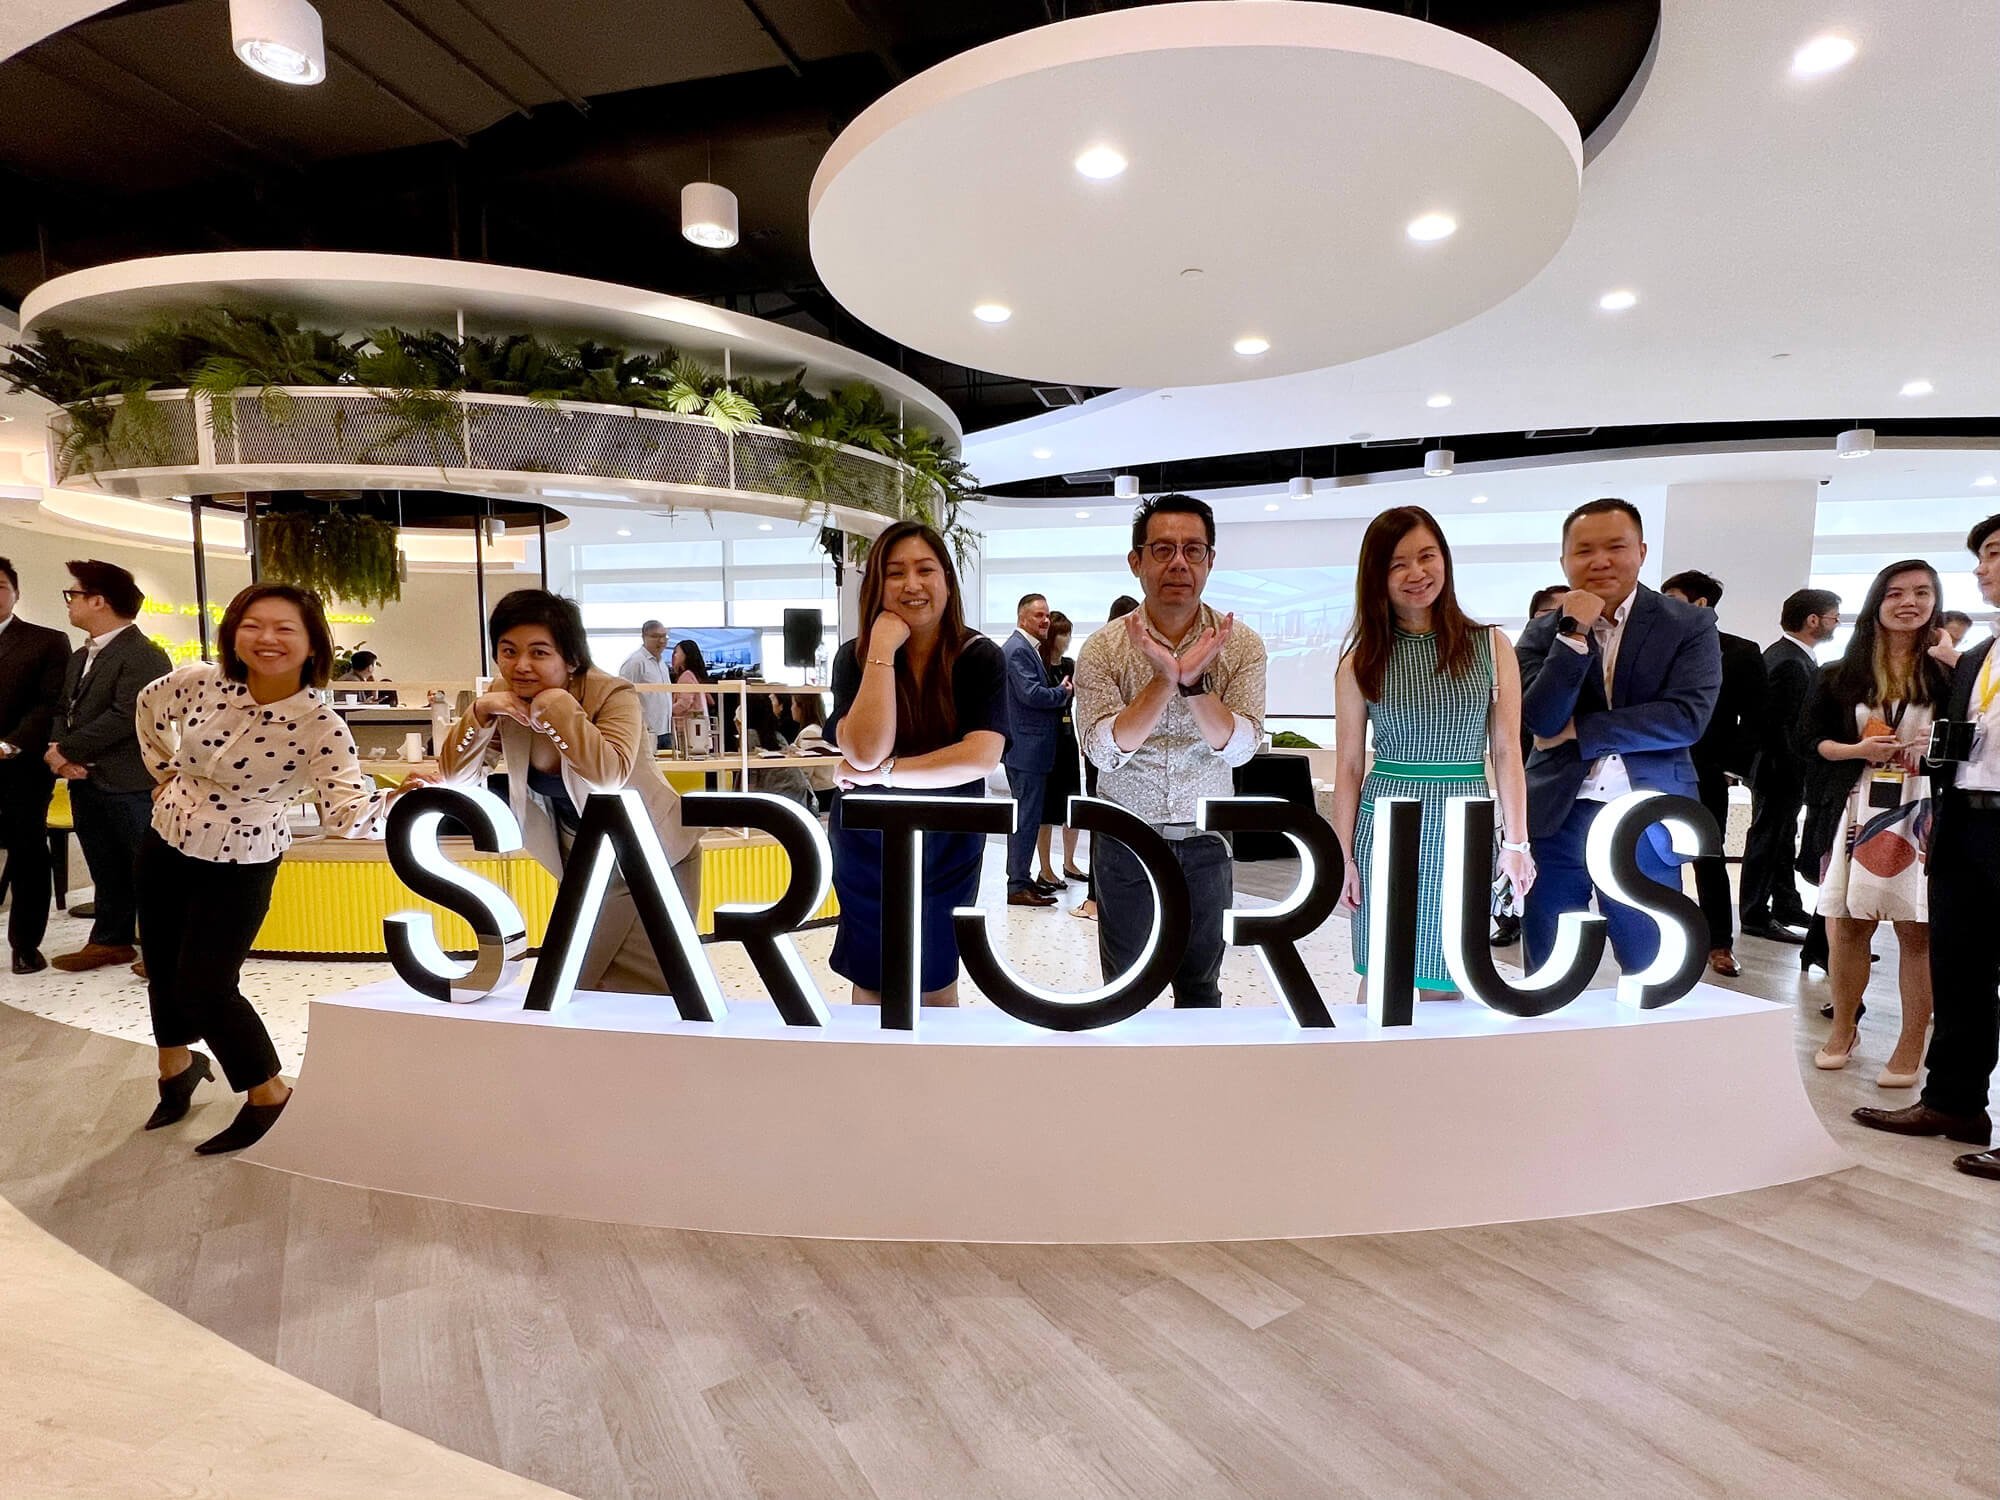  Spot the difference? Posing with the Sartorius signage, post-construction. 